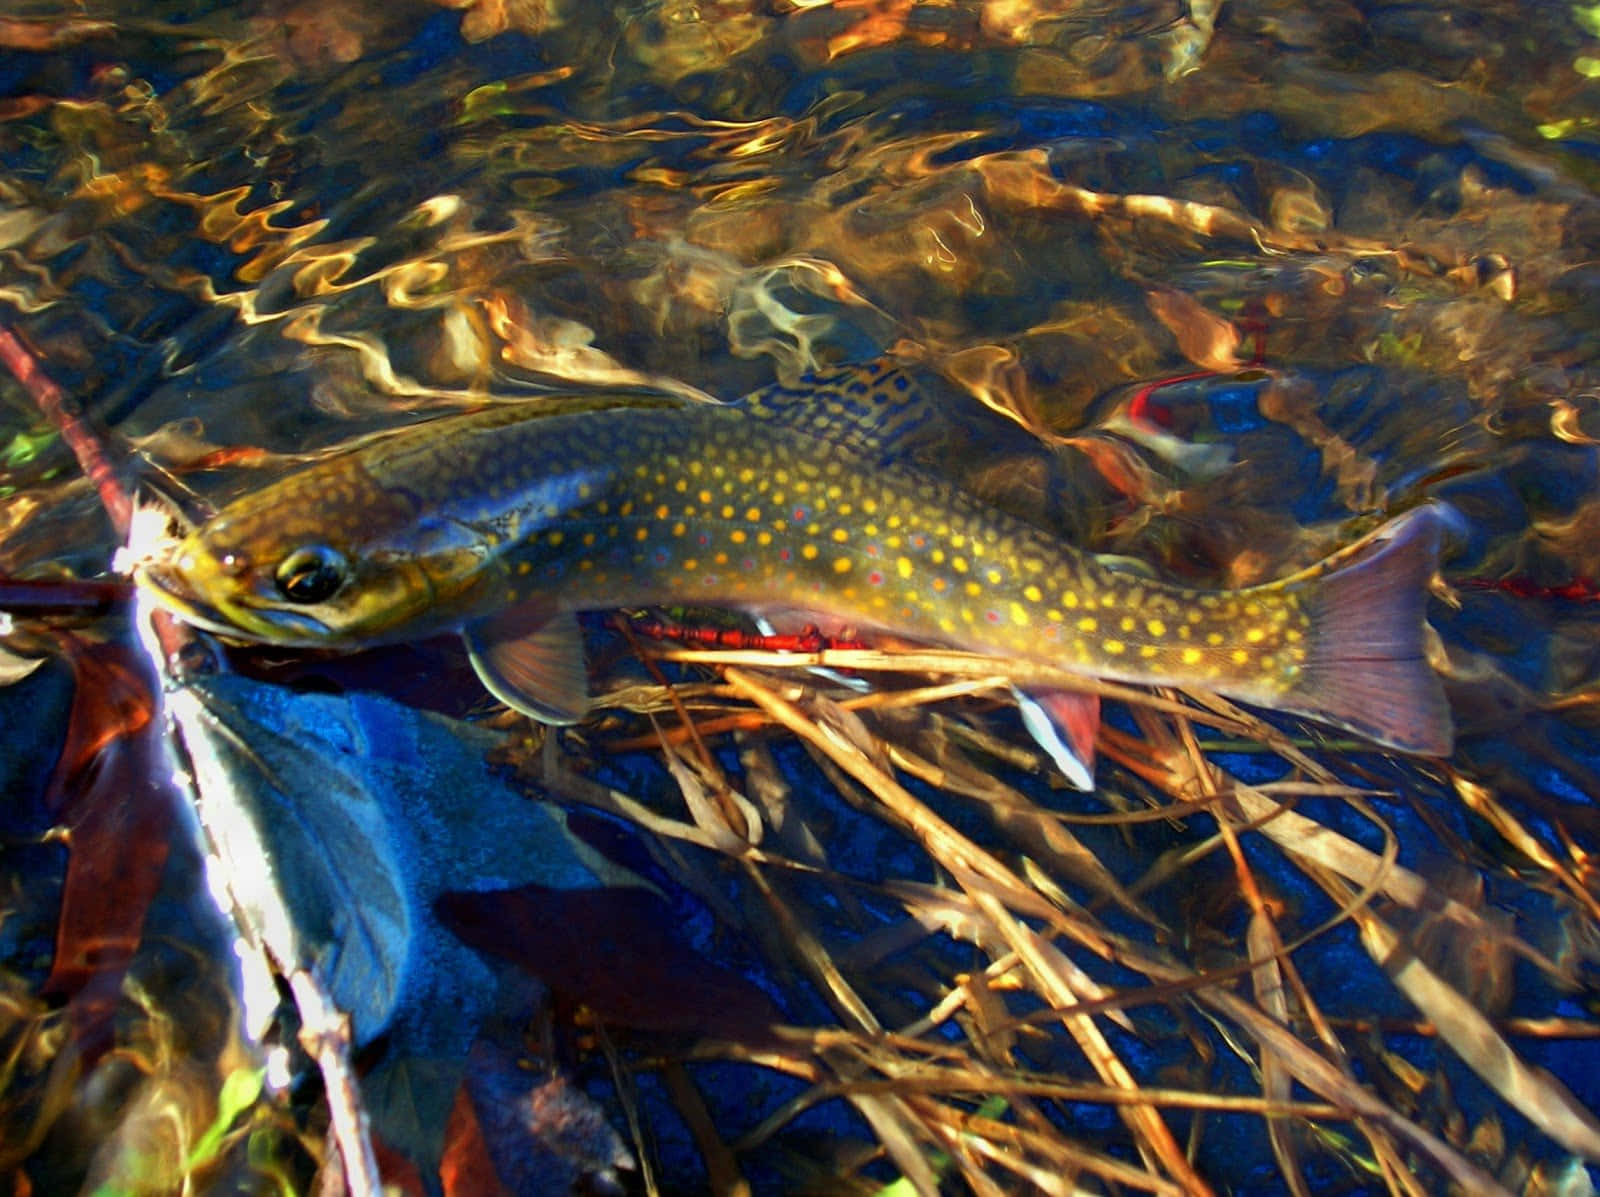 A stunning Brown Trout swimming in clear water Wallpaper